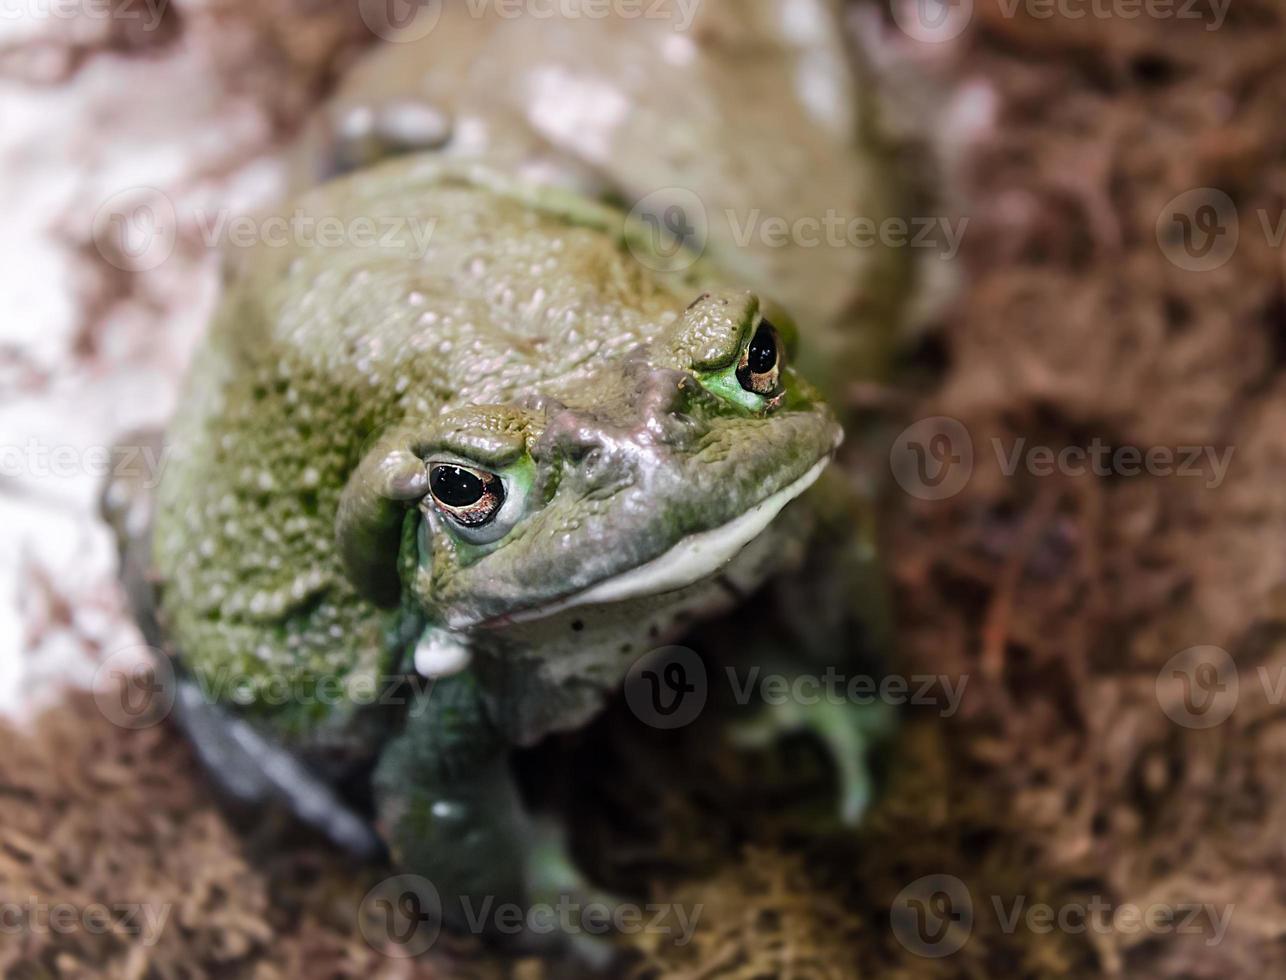 Looking down at a frog photo